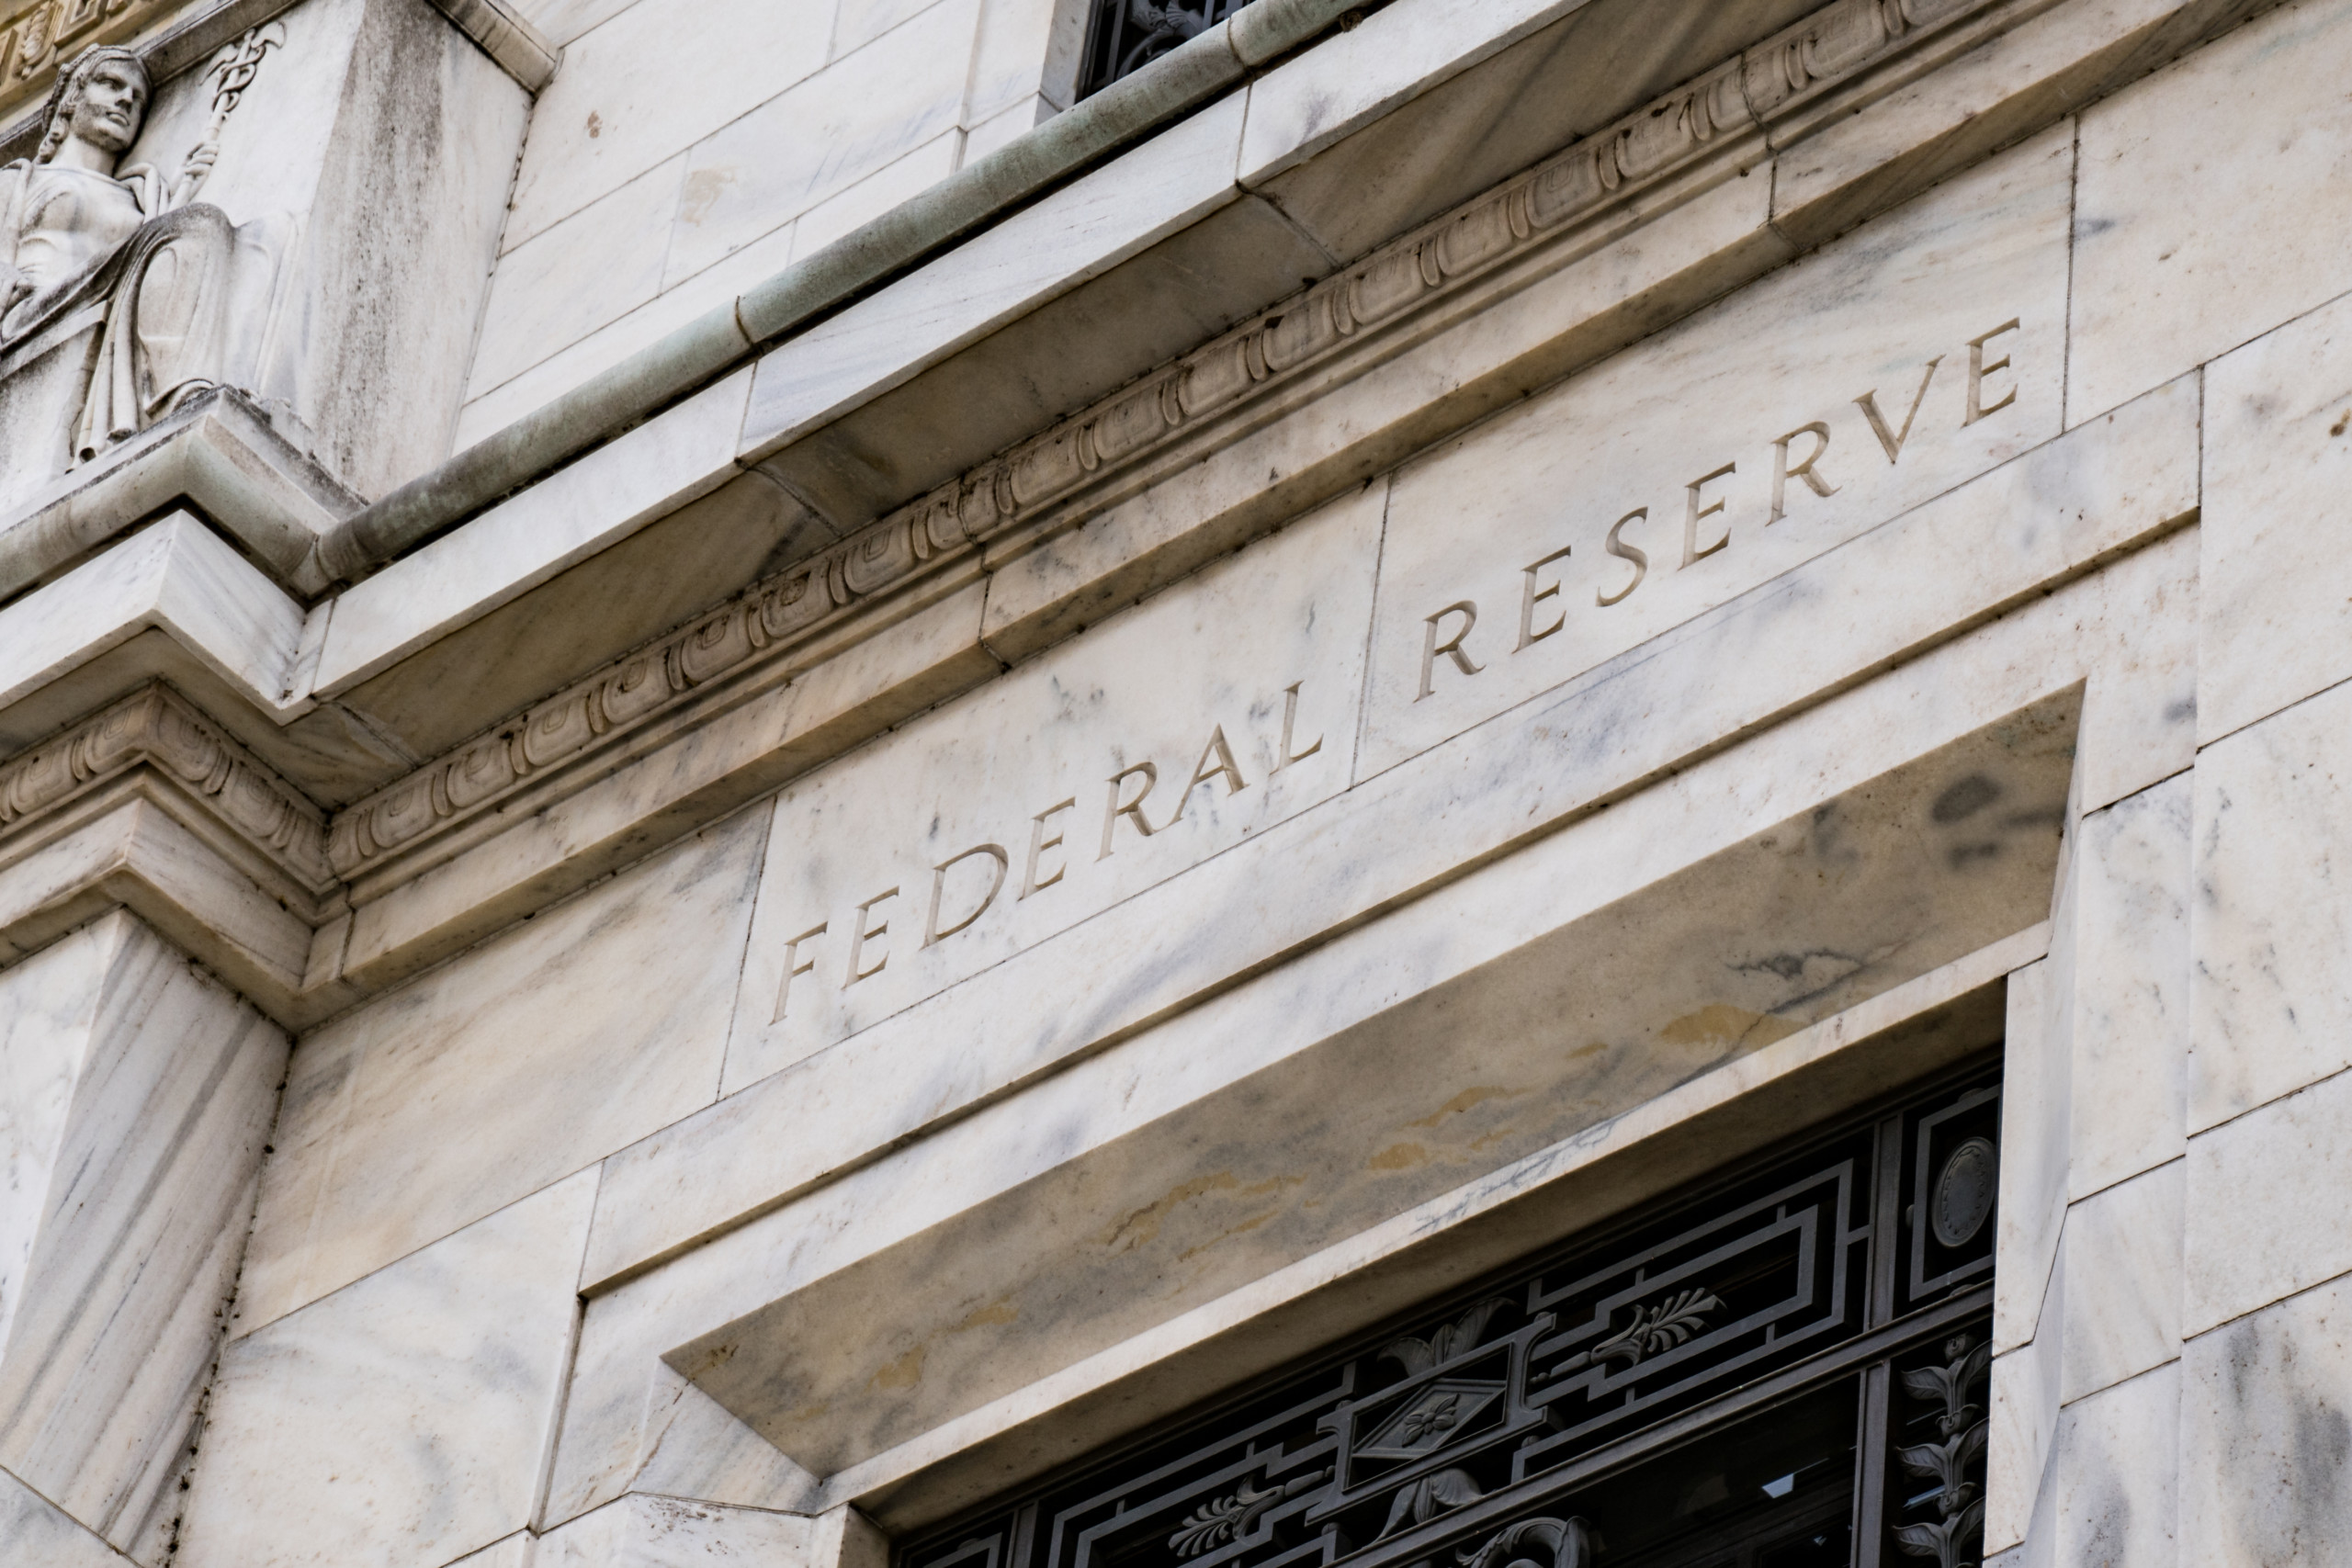 Image of Federal Reserve building in Washington, D.C.